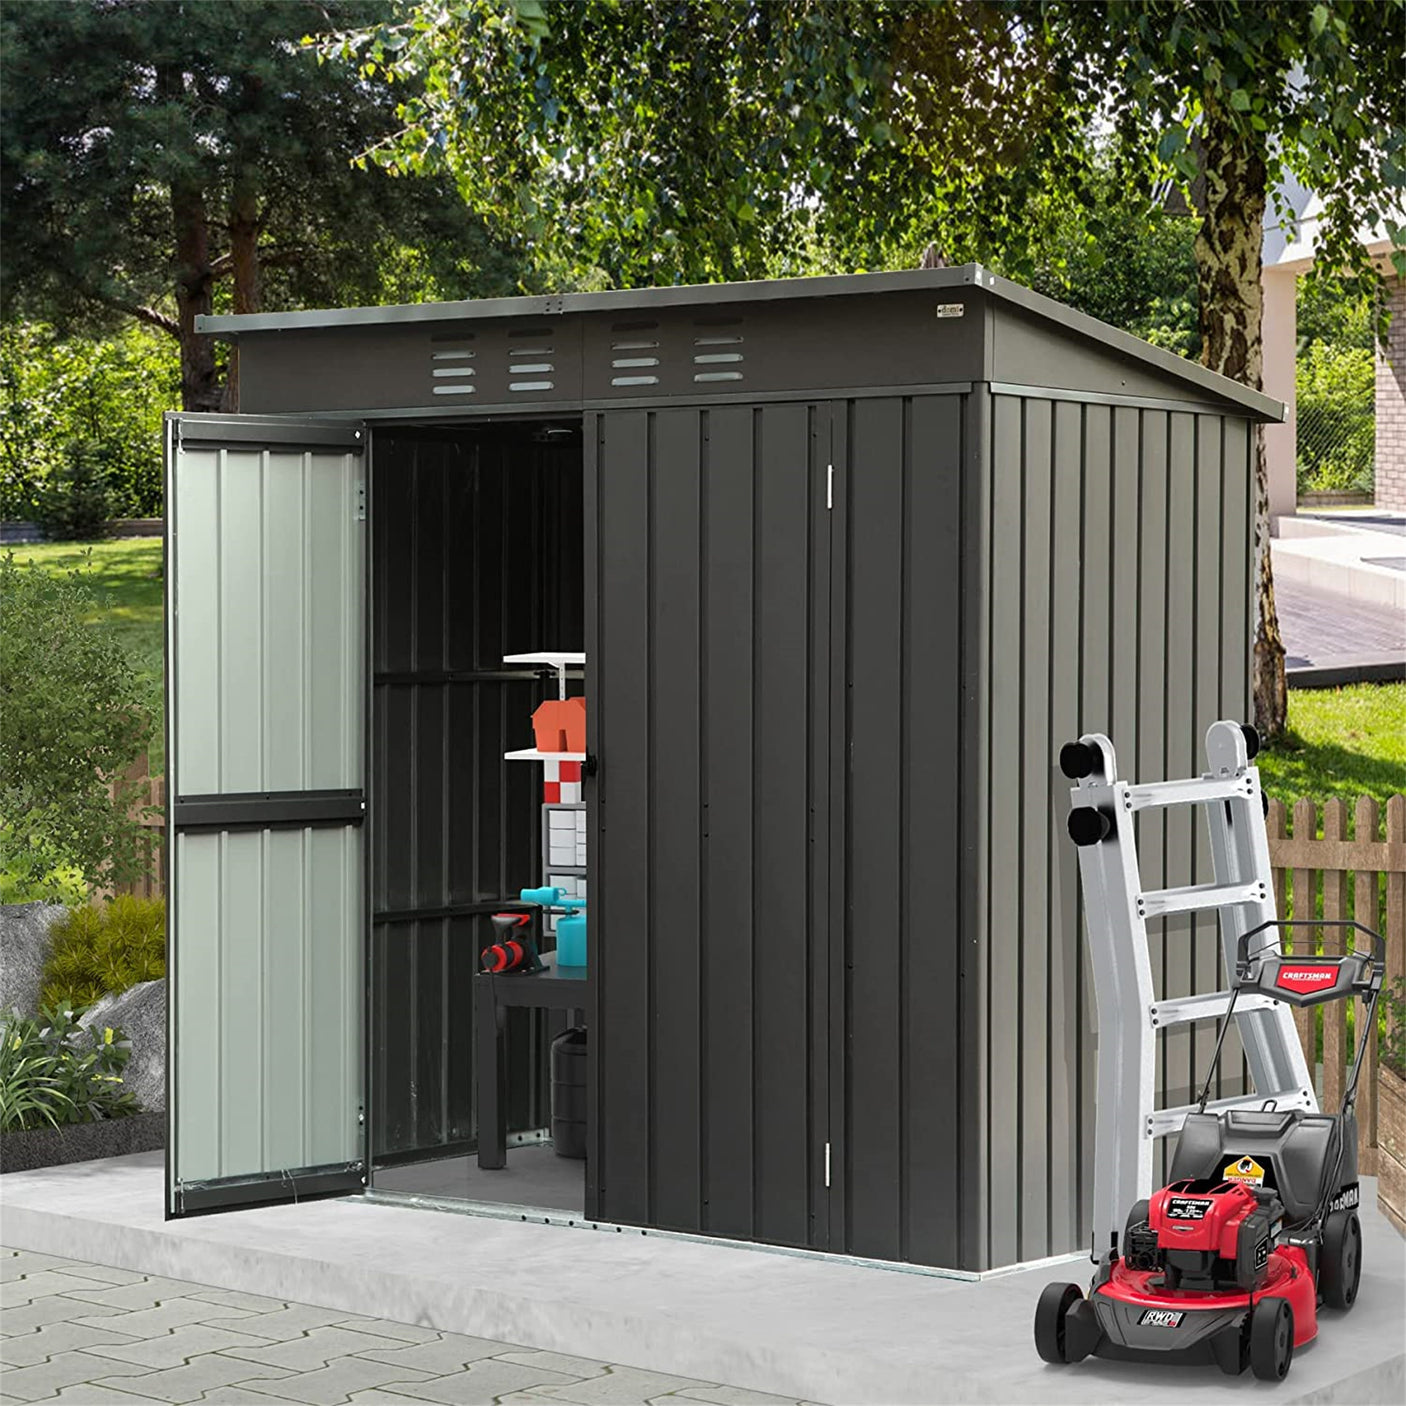 Backyard Storage Shed with Sloping Roof Galvanized Steel Frame Outdoor Garden Shed Metal Utility Tool Storage Room with Latches and Lockable Door (6.27x4.51ft, Black)